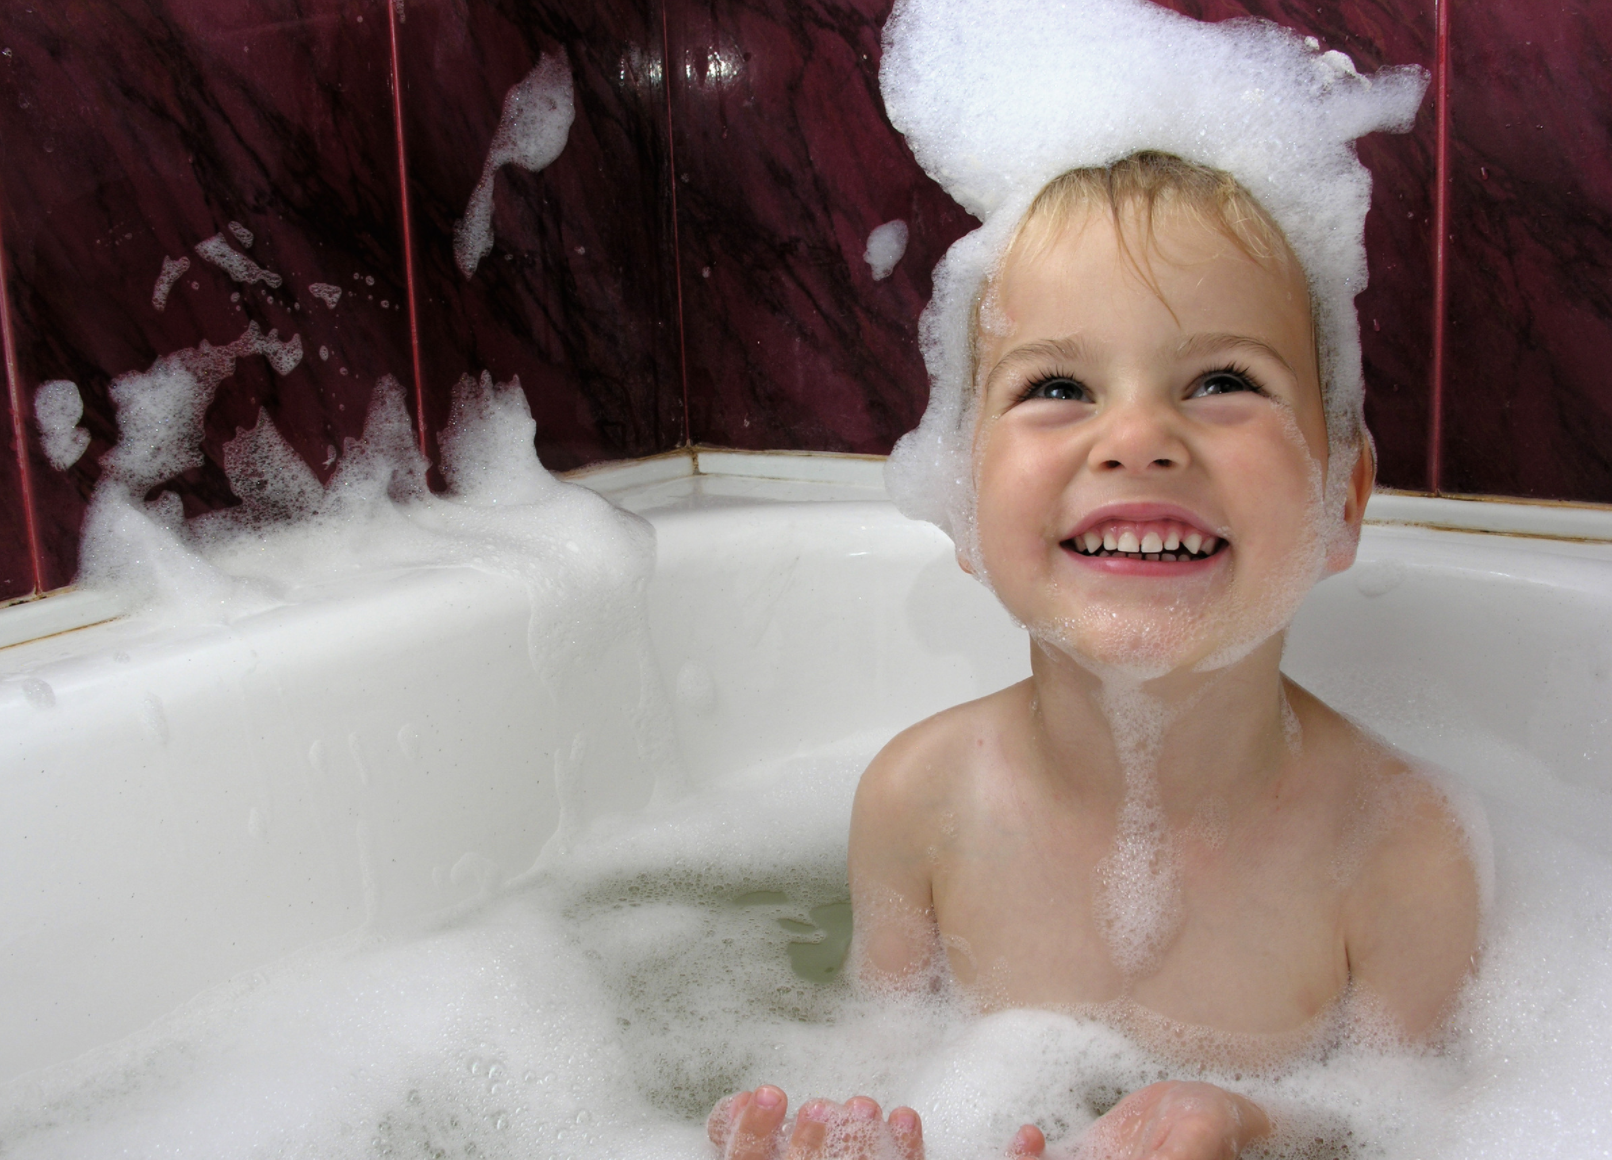 Bath time is a great time to chat and get communication flowing with your toddler. Here are 15 ways to get chatting with your toddler at bath time!